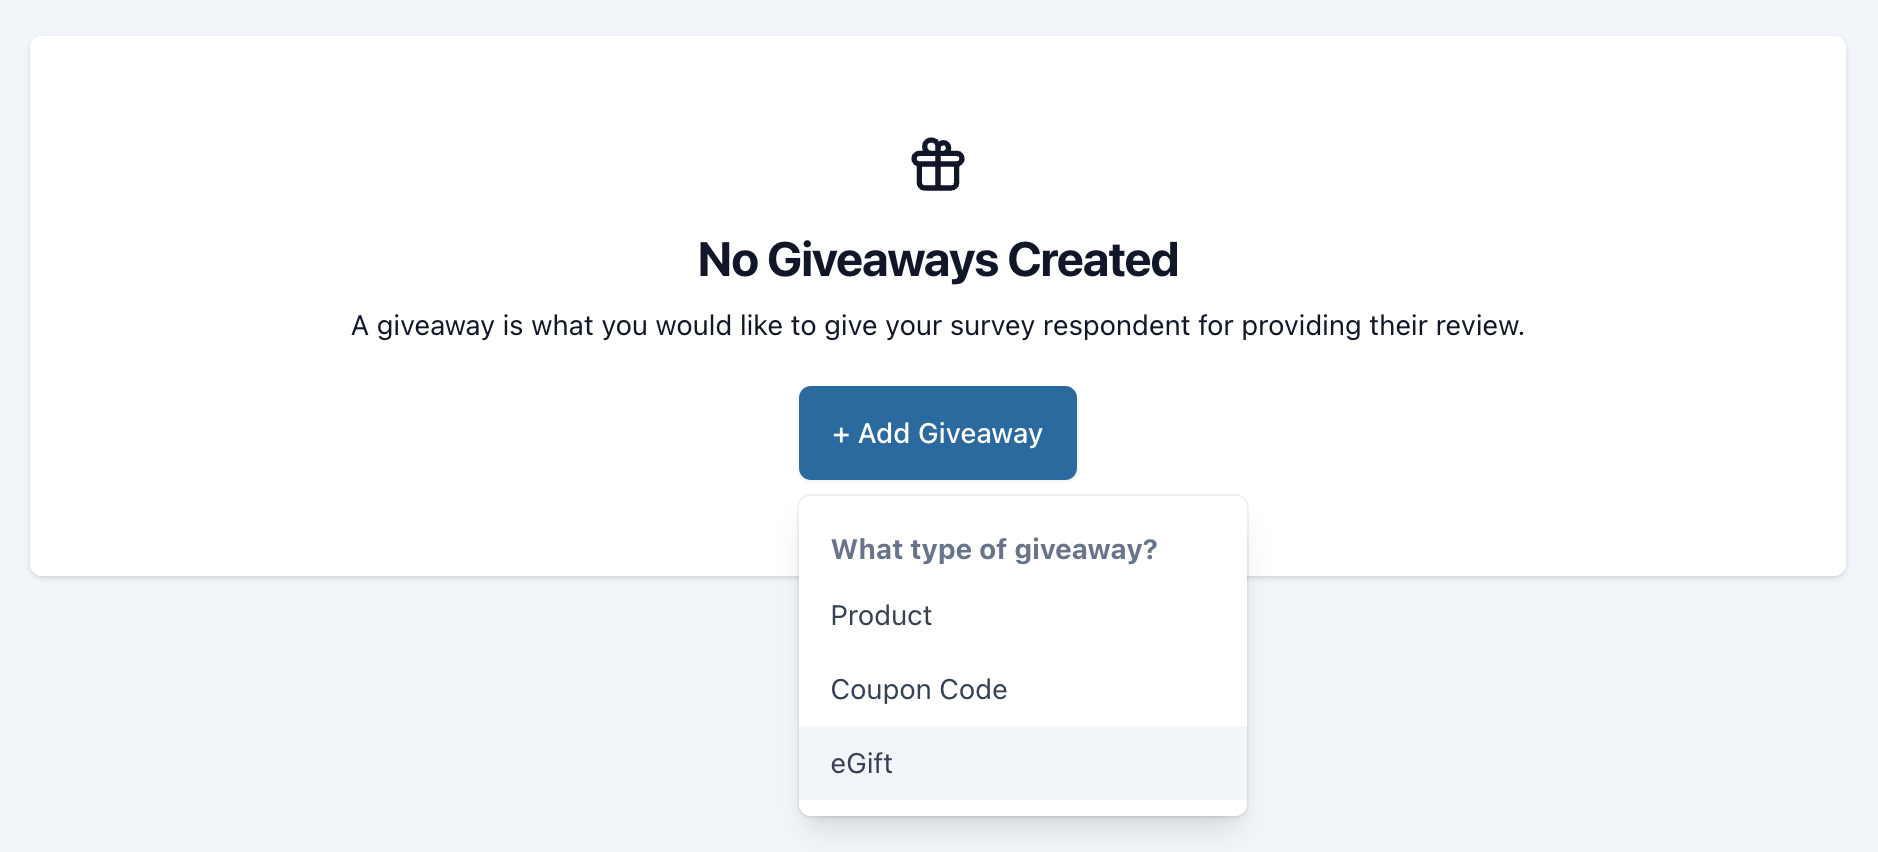 On the giveaway page, click "Add Giveaway" and then select "Coupon."